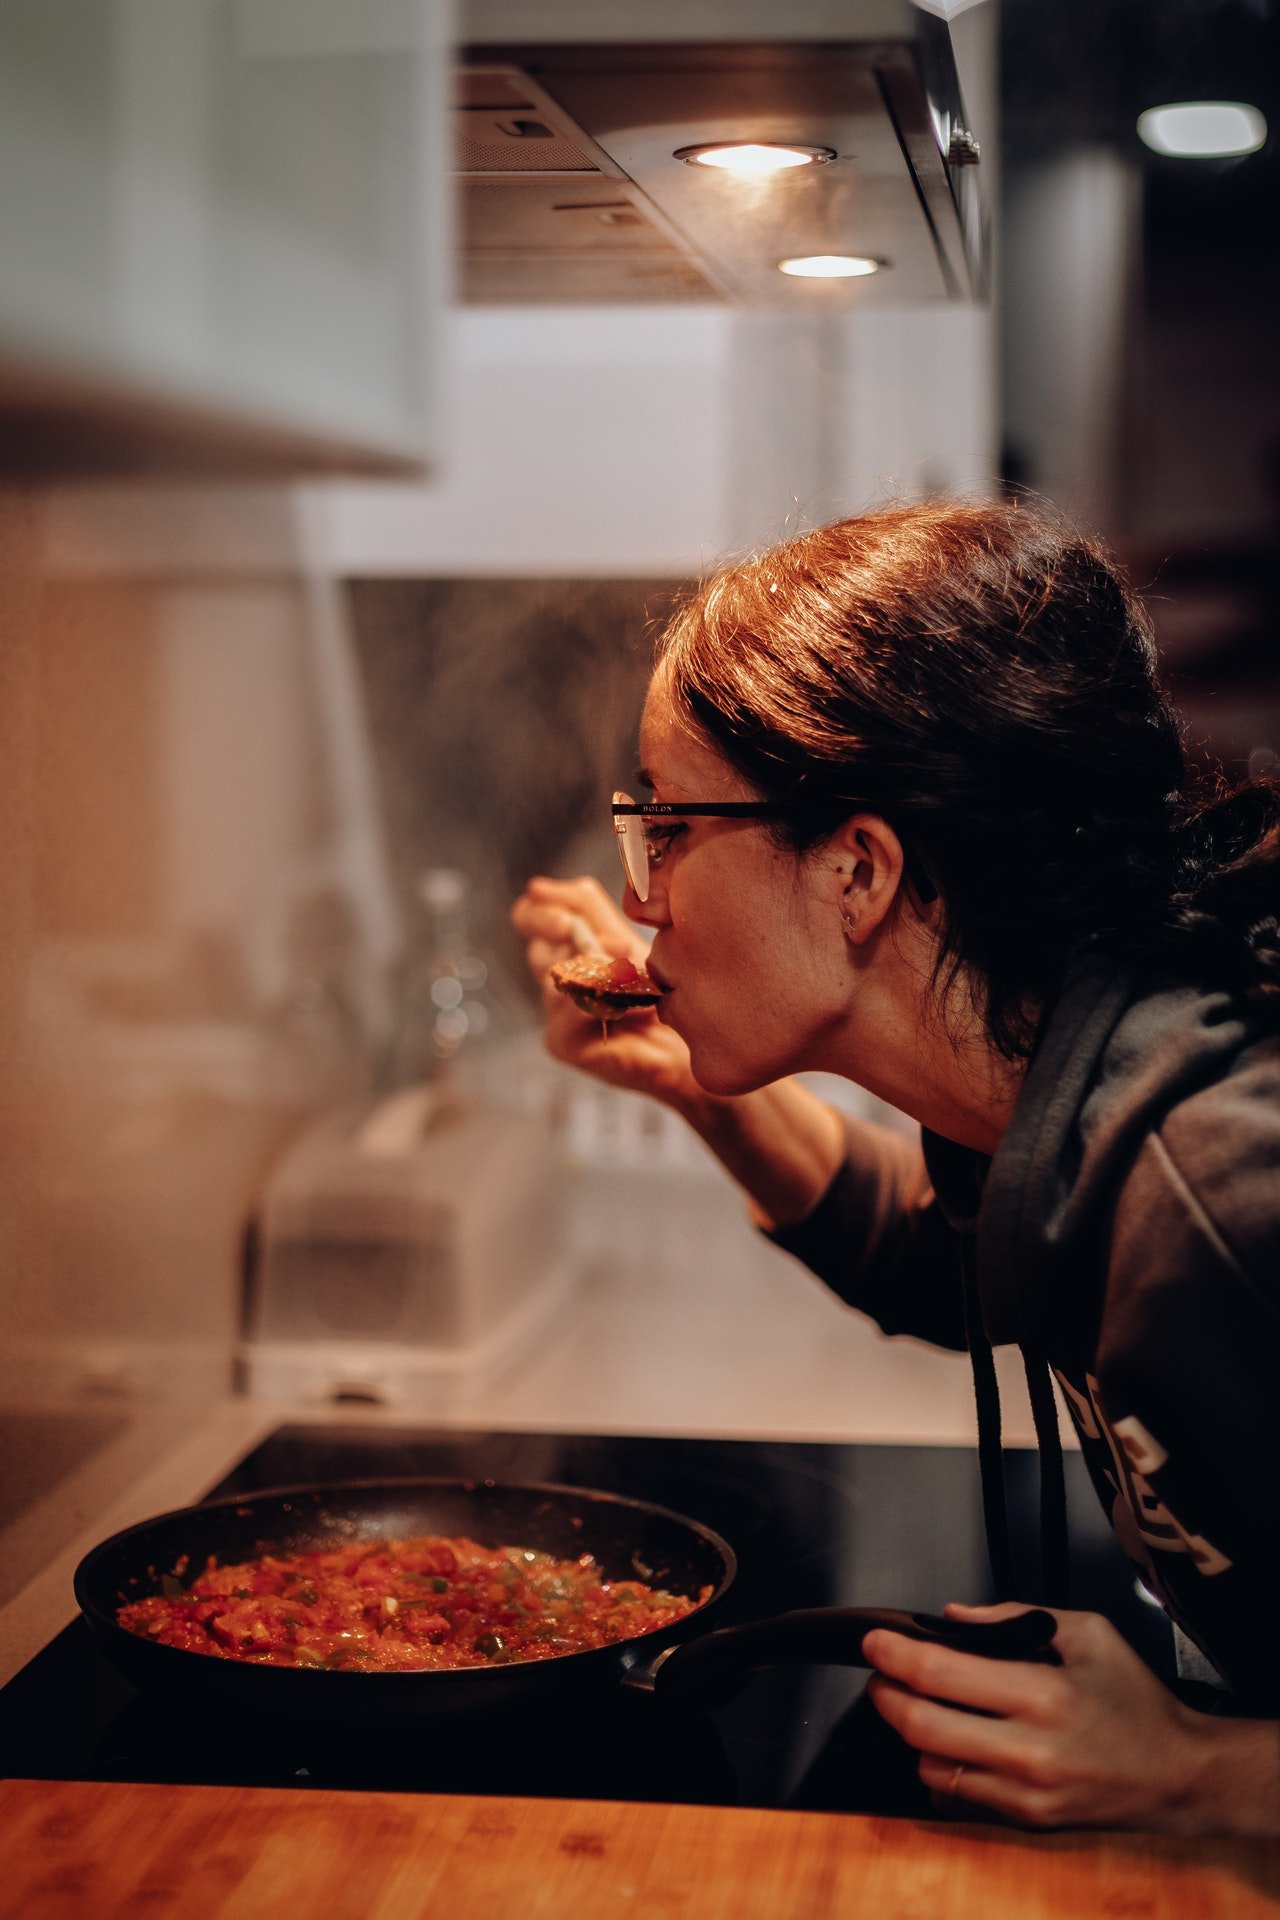 She made dinner while Billy was in the shower, trying to distract herself. | Source: Pexels